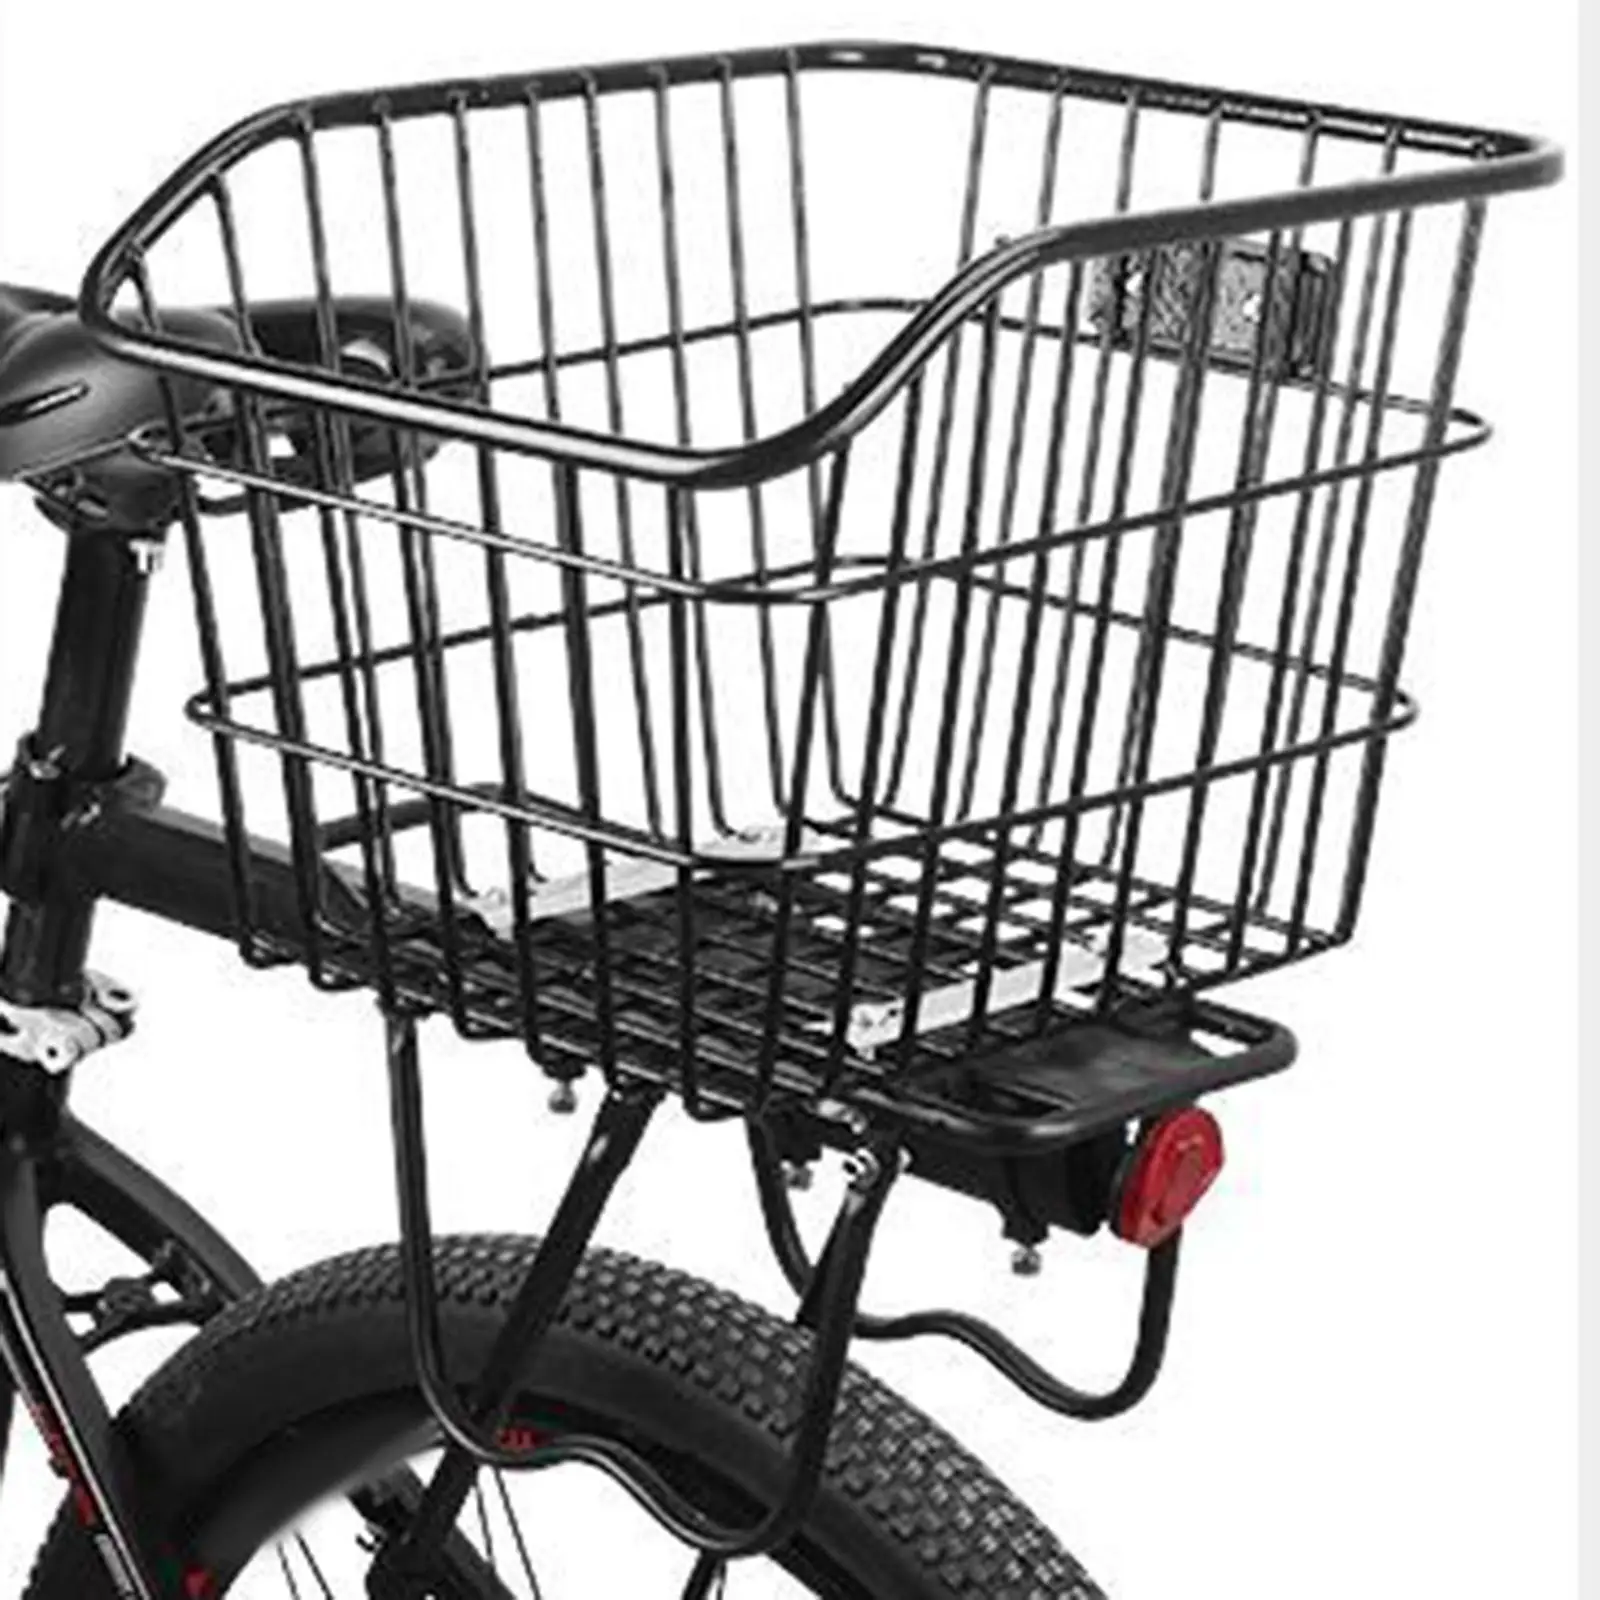 Bike Metal Wire Rear Basket without Cover Sturdy Convenient Assemble Universal Accessory Strengthened Frame for Mountain Bikes